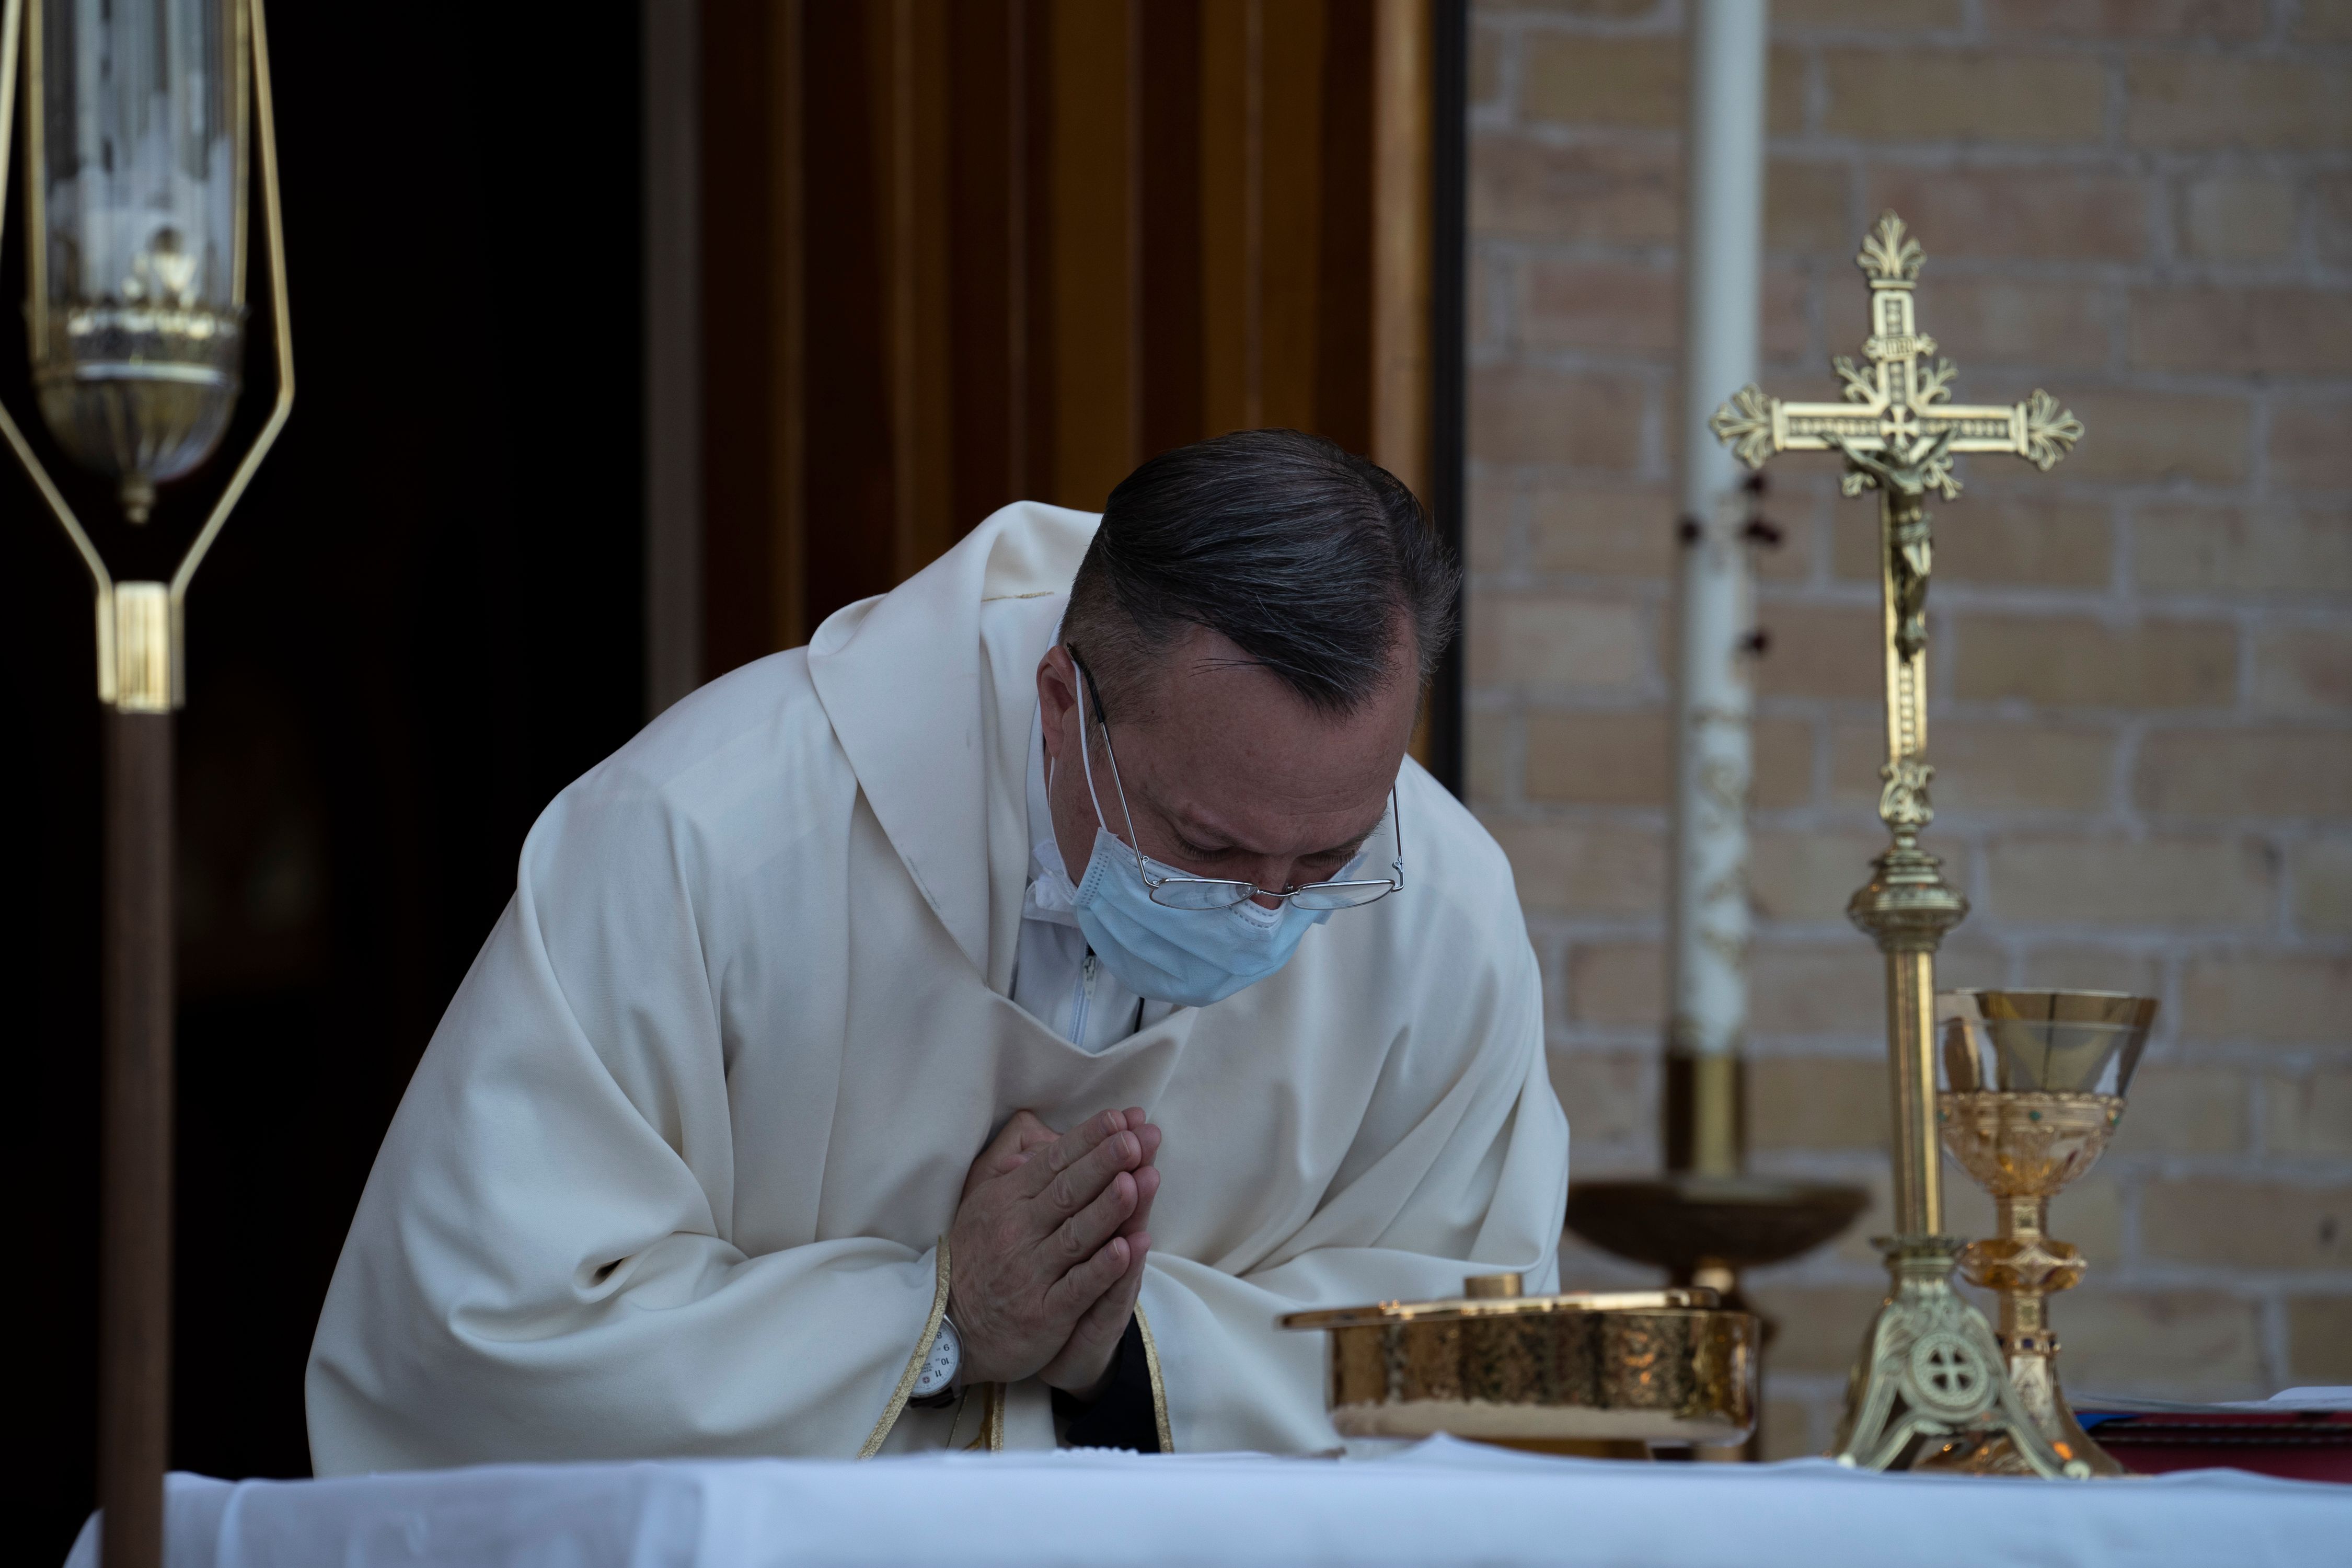 Father Christoper Williams of the Basilica of San Albino performs the Eucharist during an outdoor mass on May 2, 2020 in Mesilla, New Mexico, amid the coronavirus pandemic. - (Photo by PAUL RATJE/AFP via Getty Images)